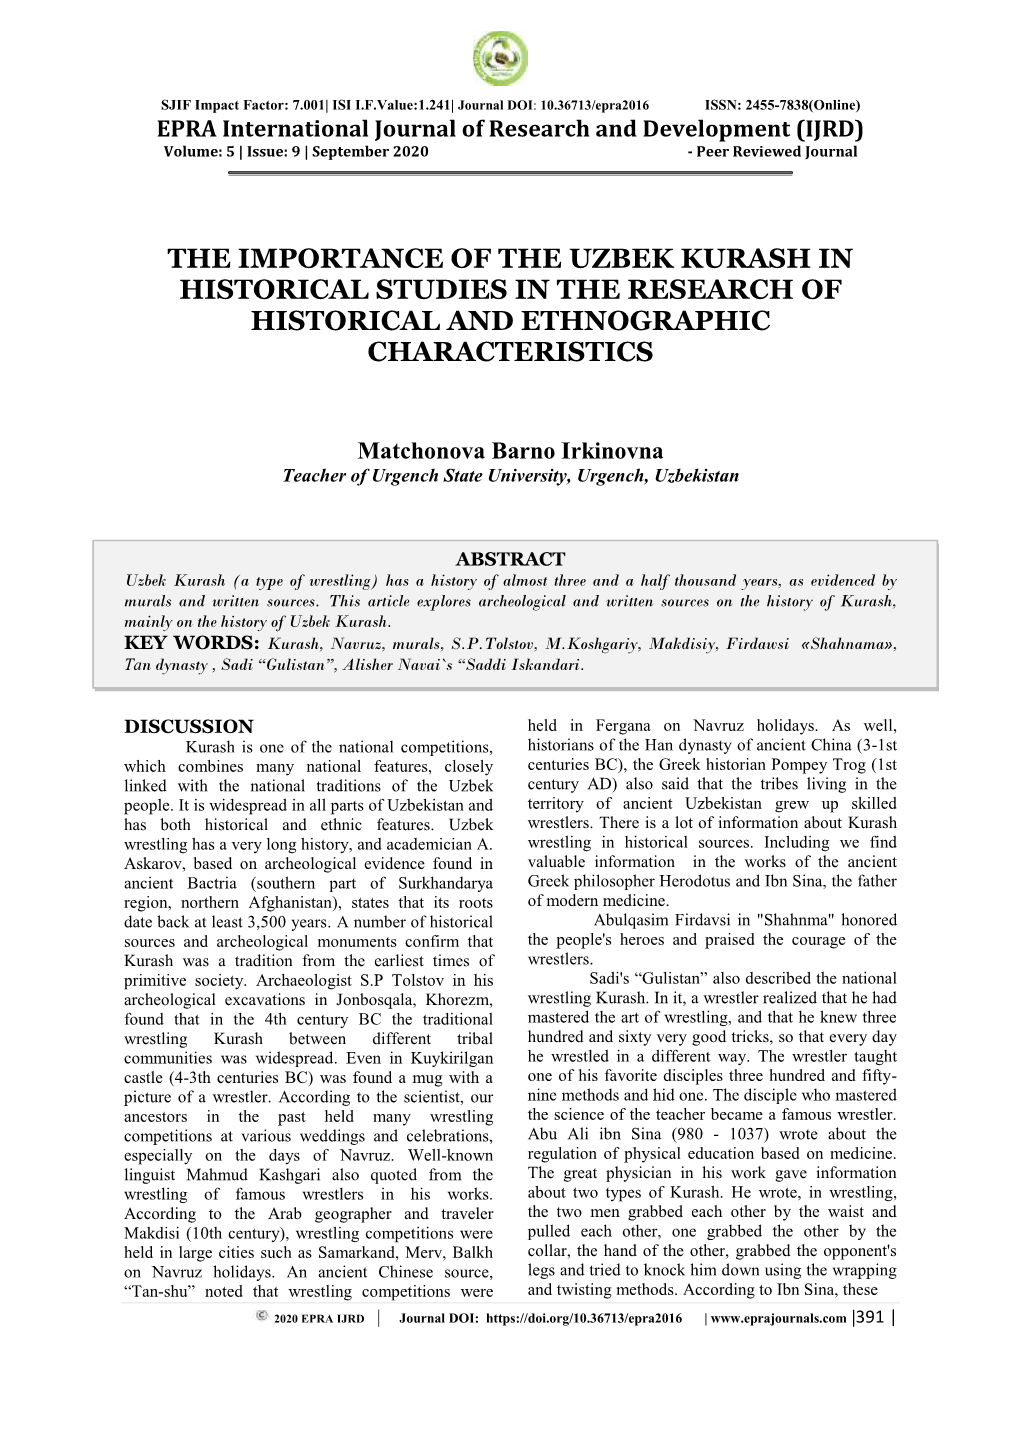 The Importance of the Uzbek Kurash in Historical Studies in the Research of Historical and Ethnographic Characteristics